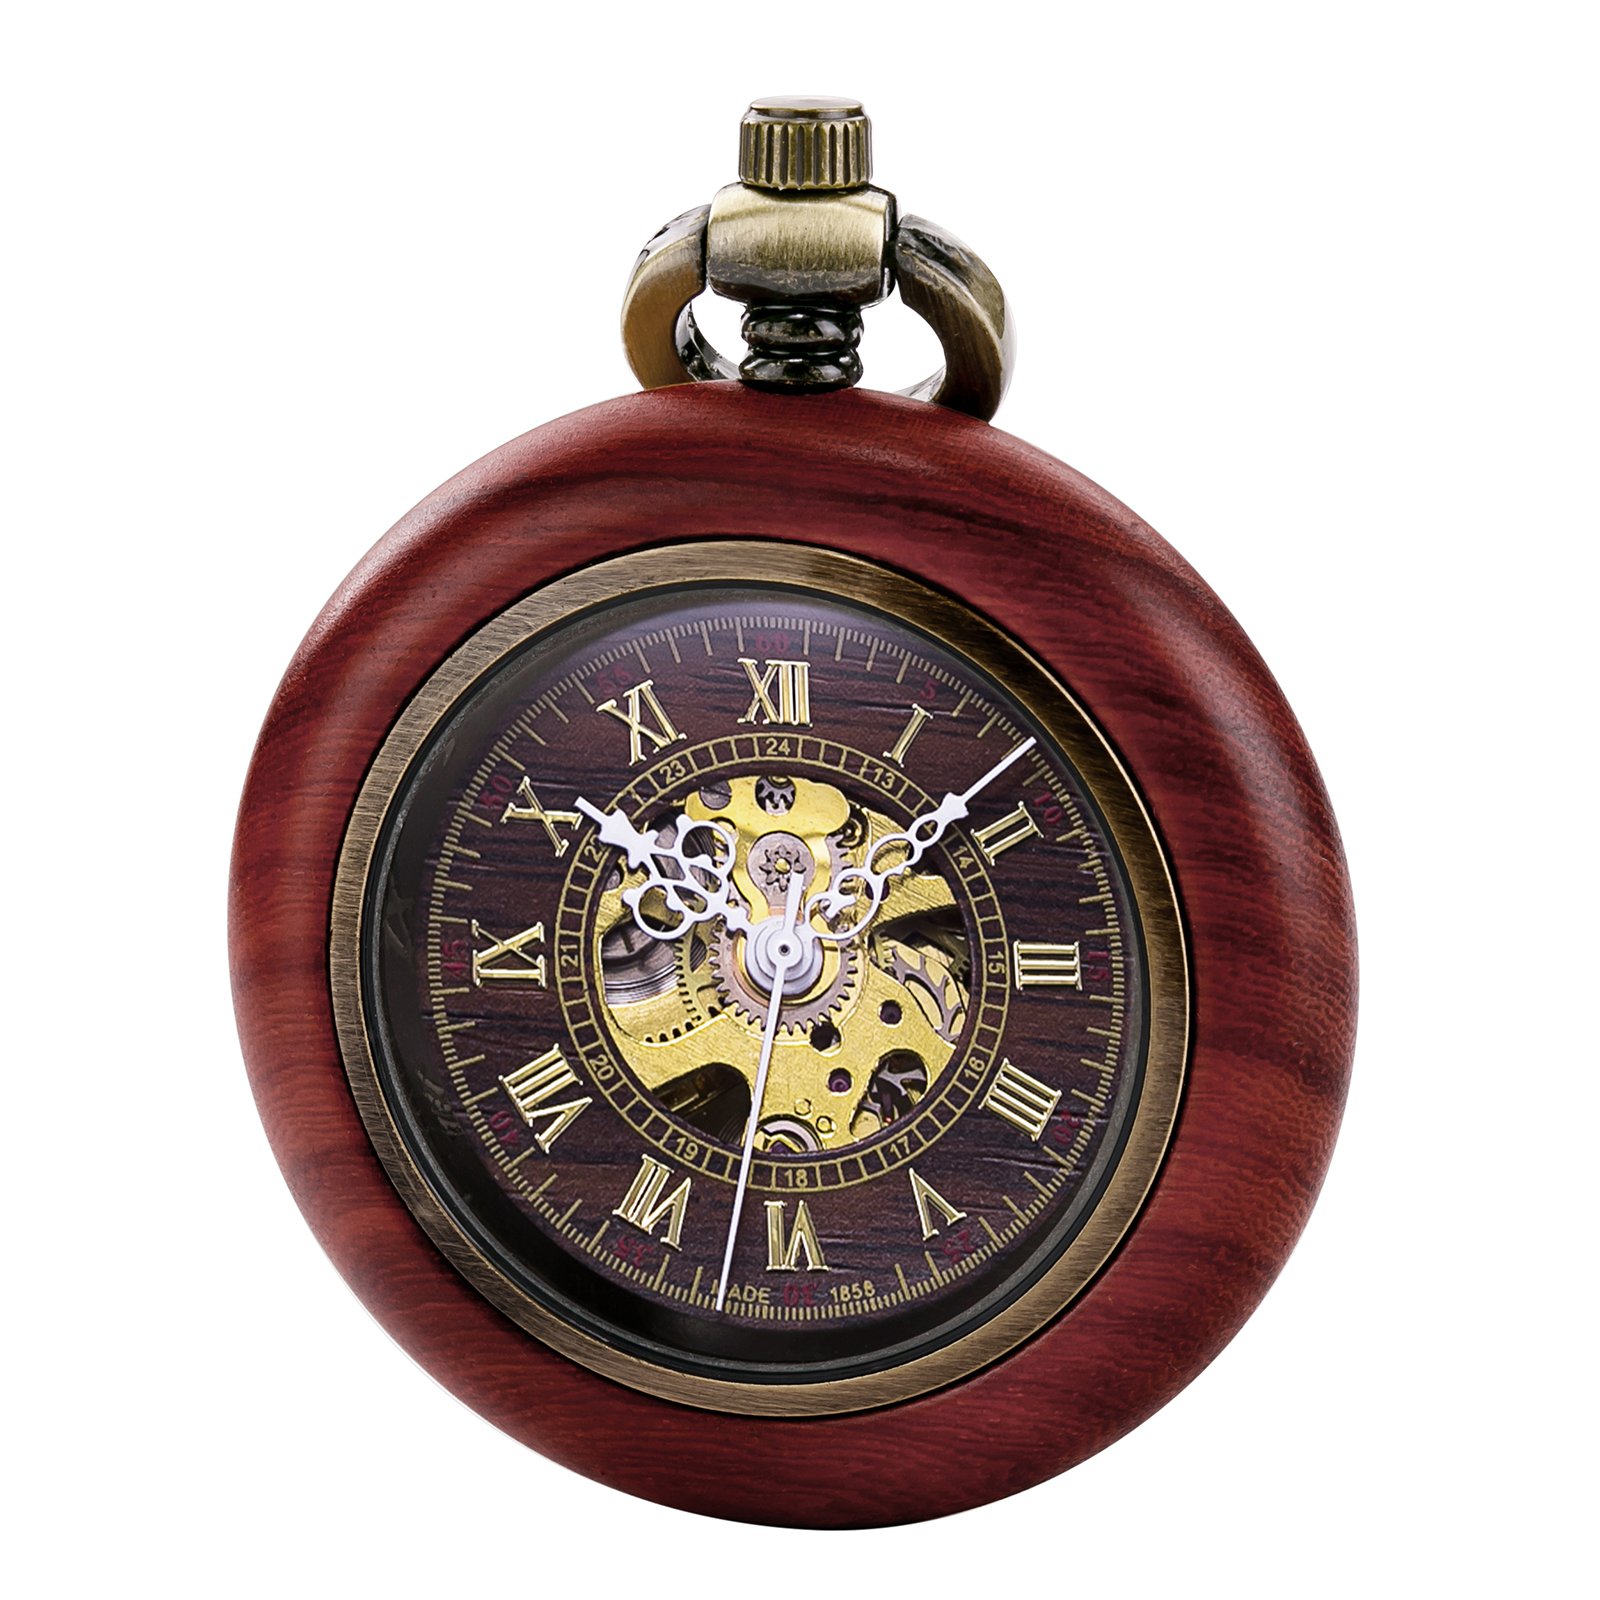 TREEWETO Vintage Wood Mechanical Pocket Watch for Men Women Steampunk Skeleton Dial with Chain + Box